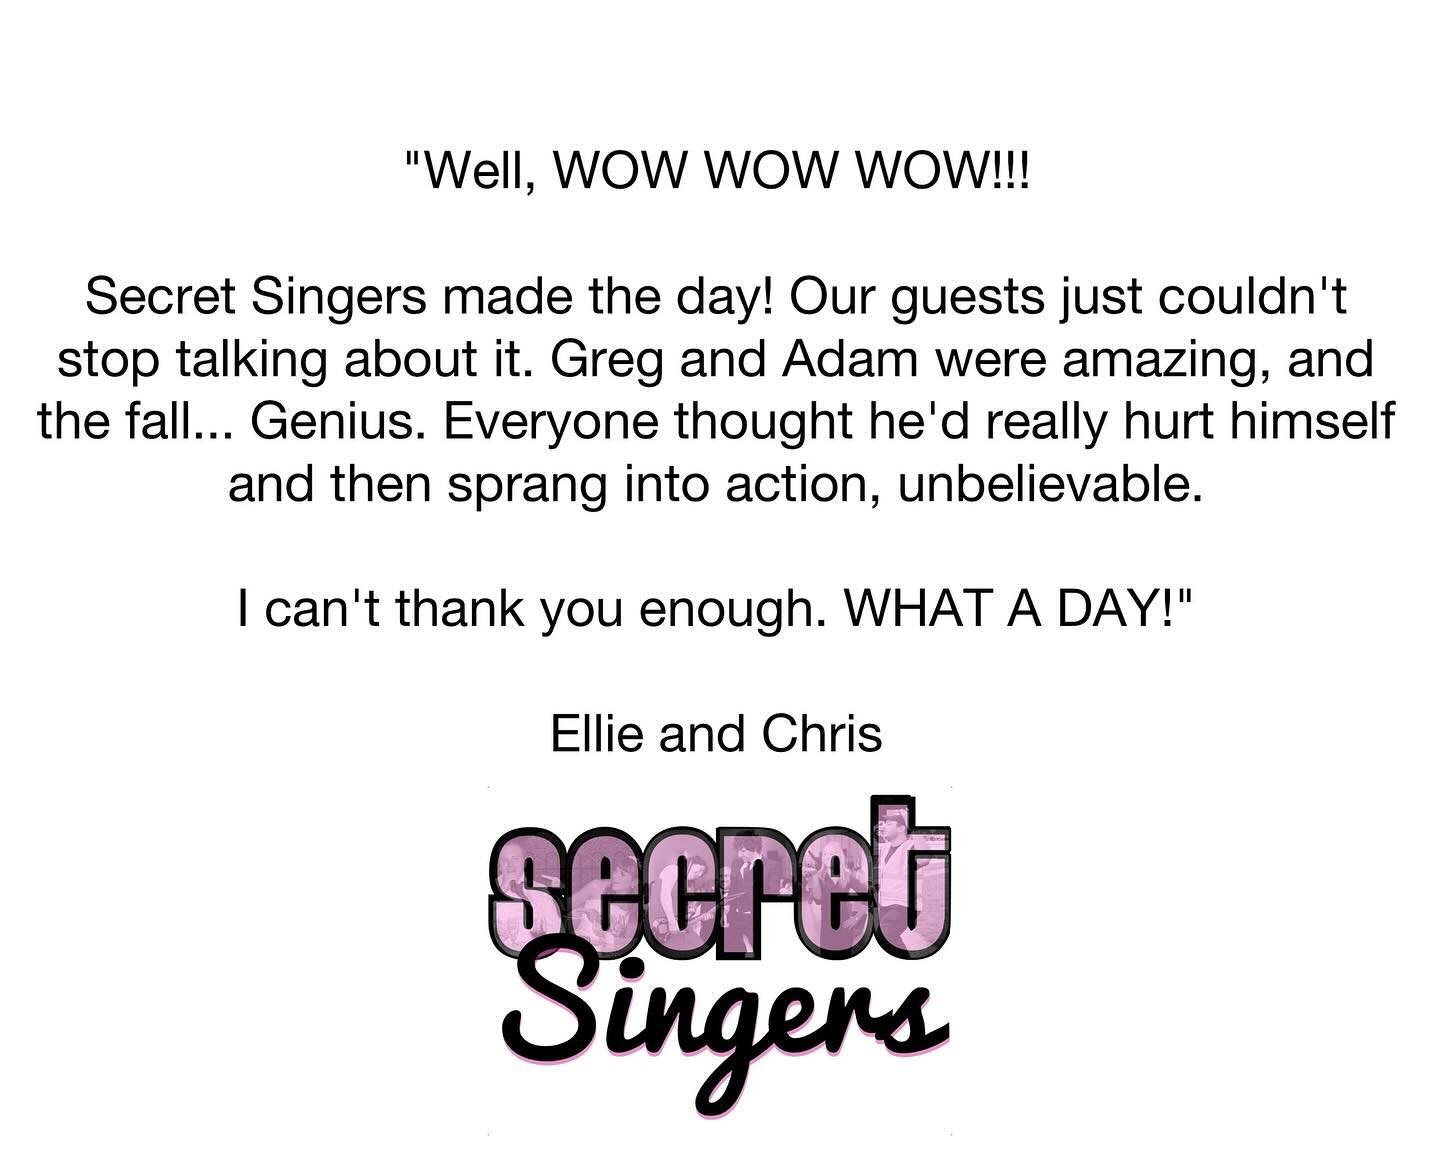 Owen Wilson would be proud of the amount of wow&rsquo;s used in this lovely feedback.

Thank you so much for these kind words ❤️

#review #feedback #message  #secretsingers #singingwaiters #secretwaiters #surprisesingers #surpriseentertainment #secre